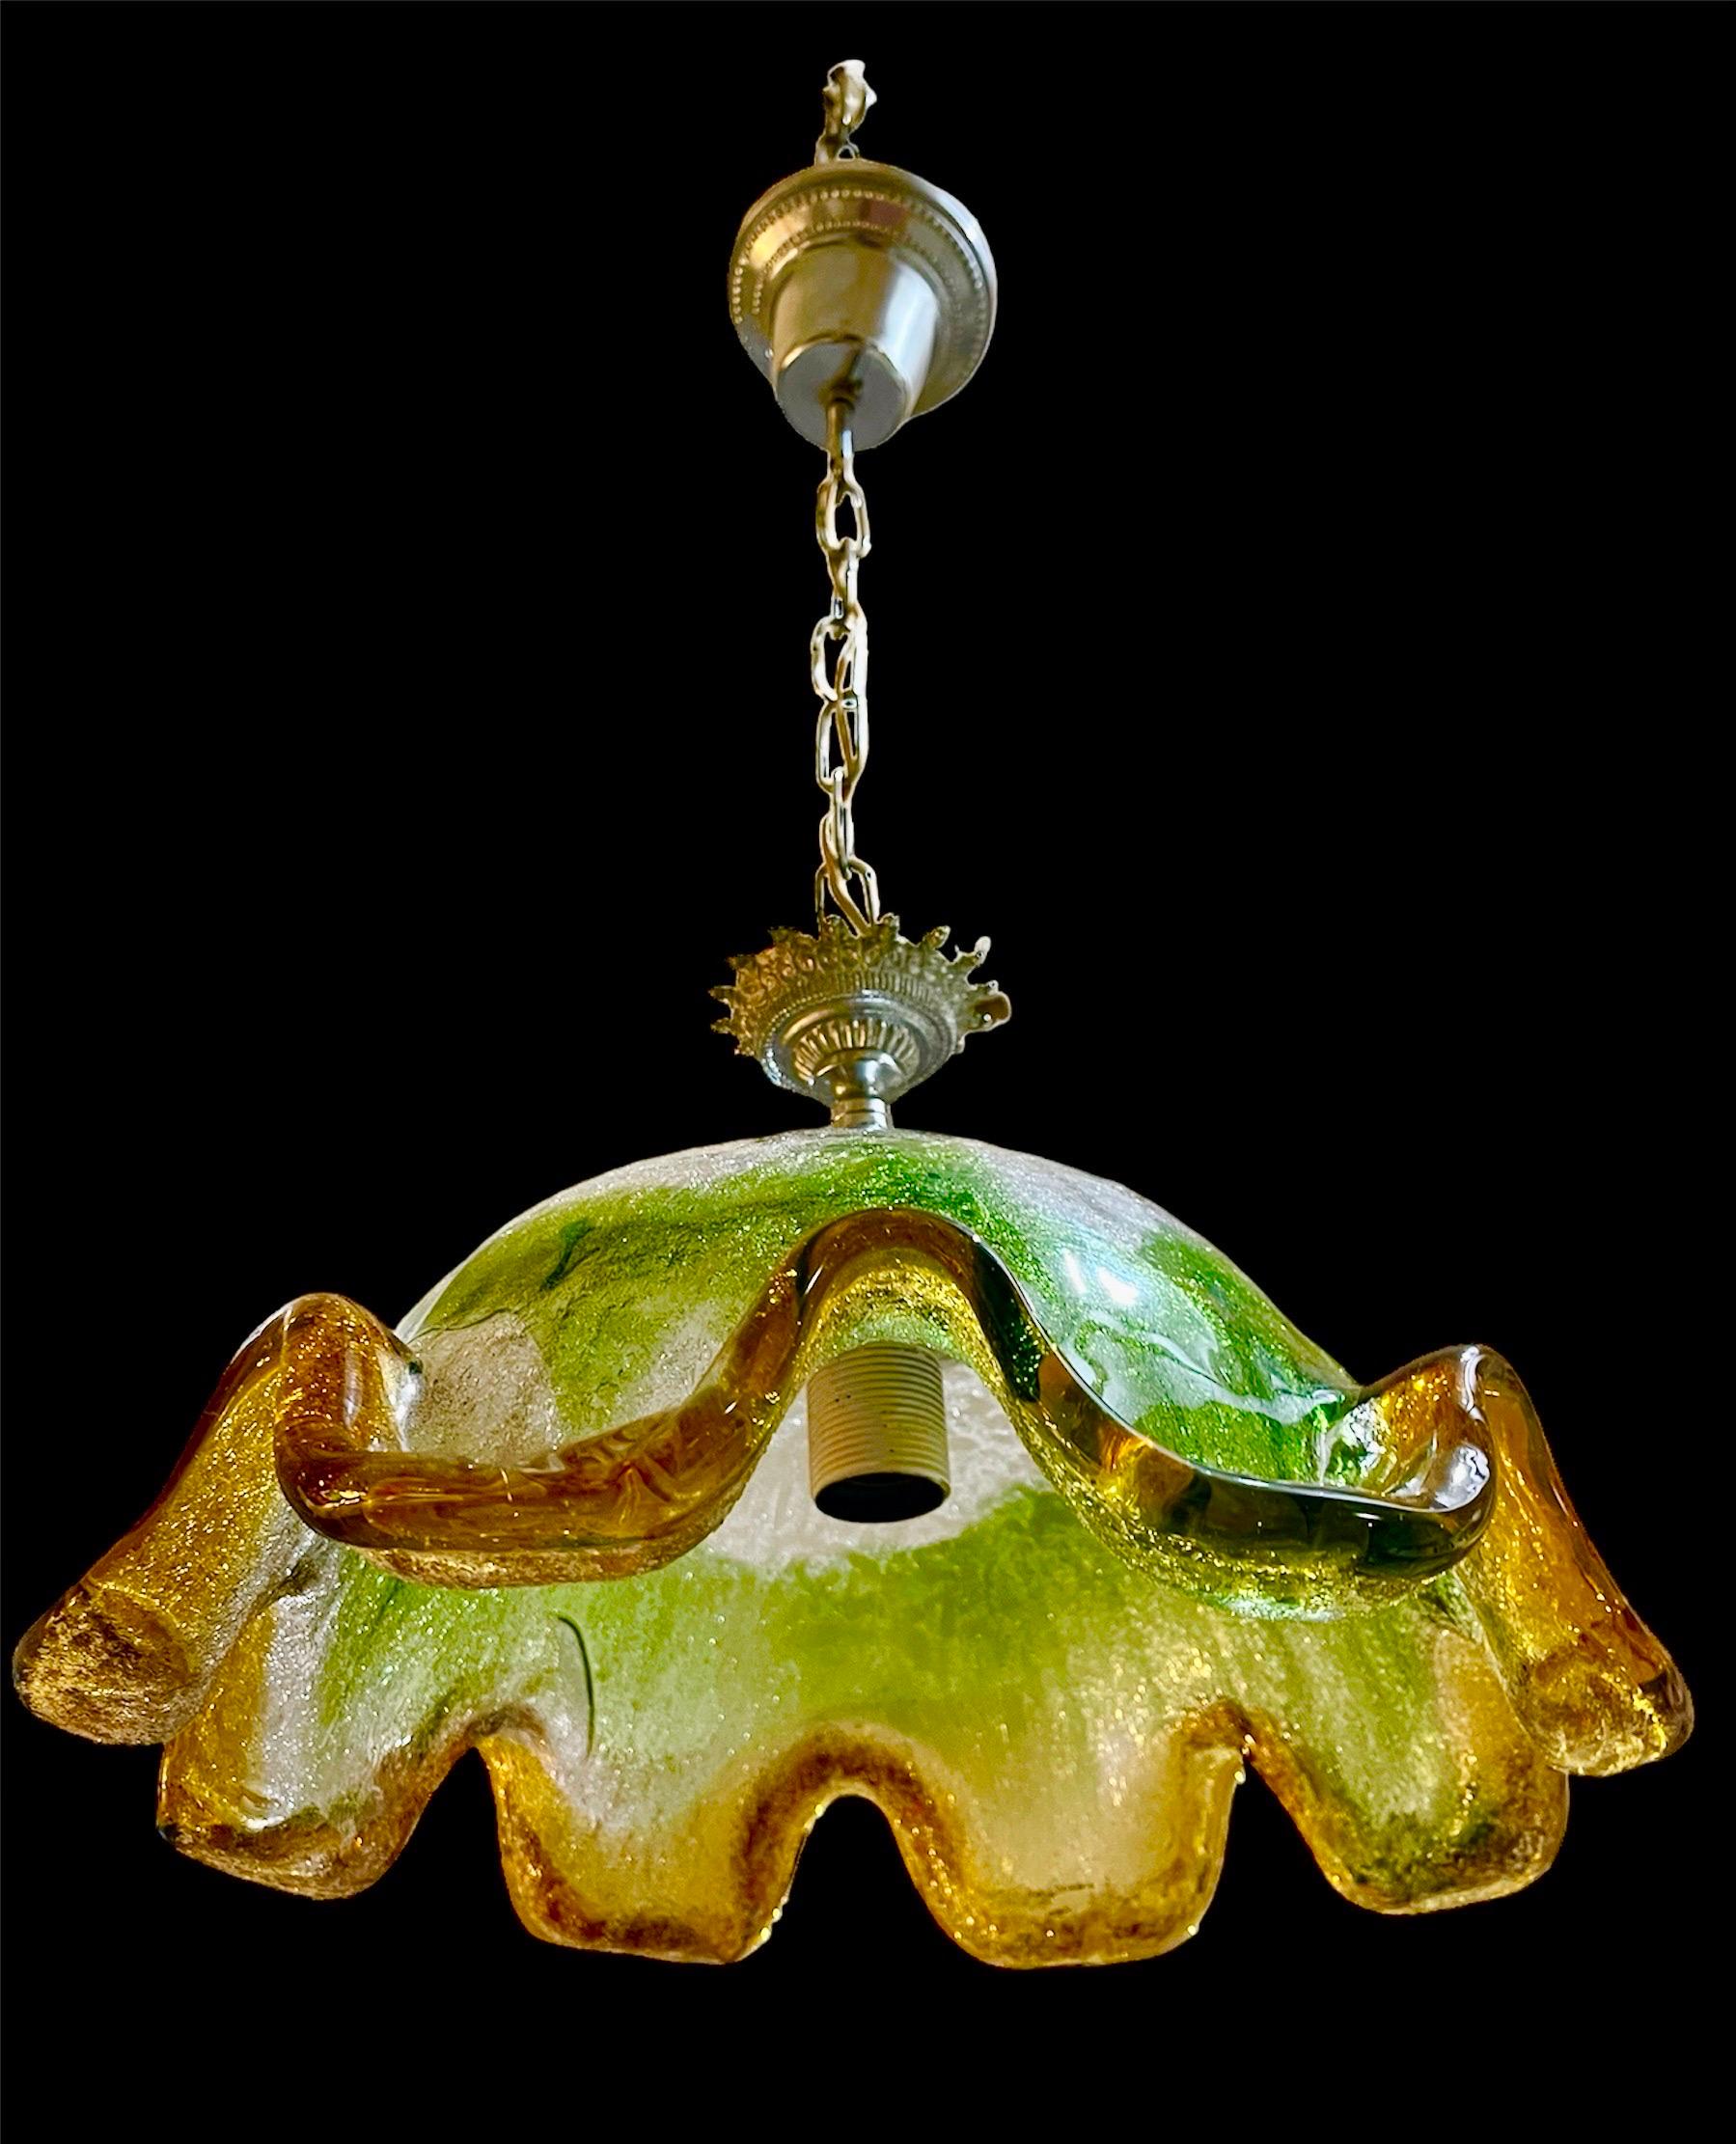 Exceptional Mazzega pendant, multicolore of glass Murano with structure. The Design and the quality of the glass make this piece the best of the Italian Design. This unique Mazzega globe in glass murano are exceptional.

 This Pieces of Arts glass